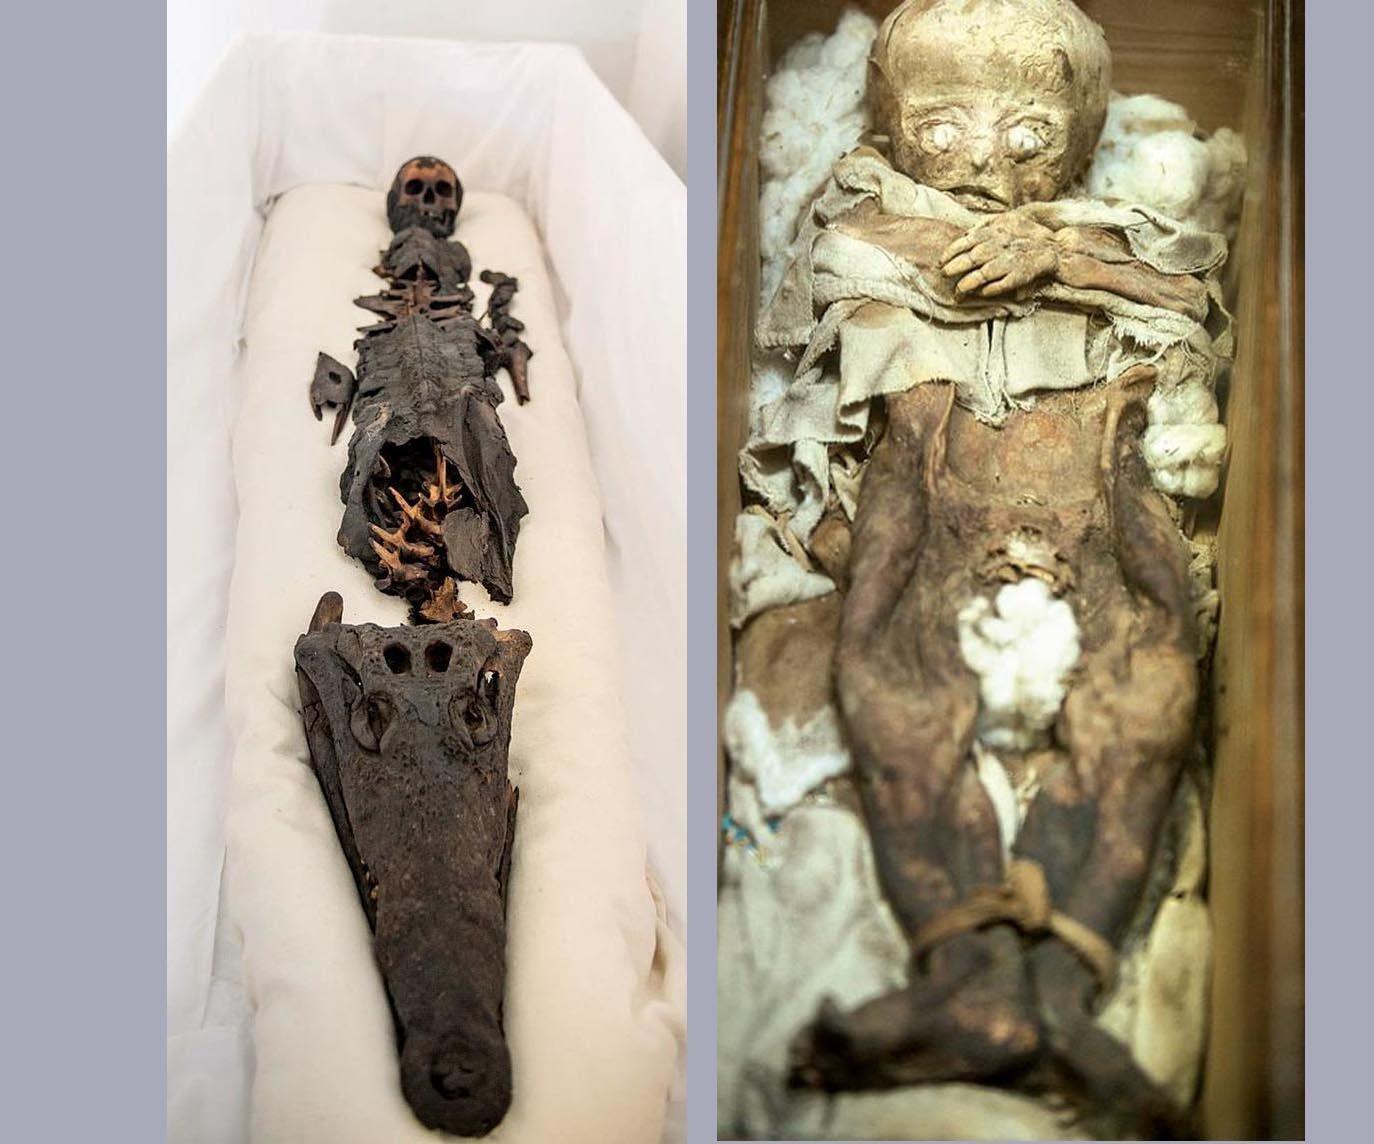 The two-headed mummy that stirred panic in Ottoman palace